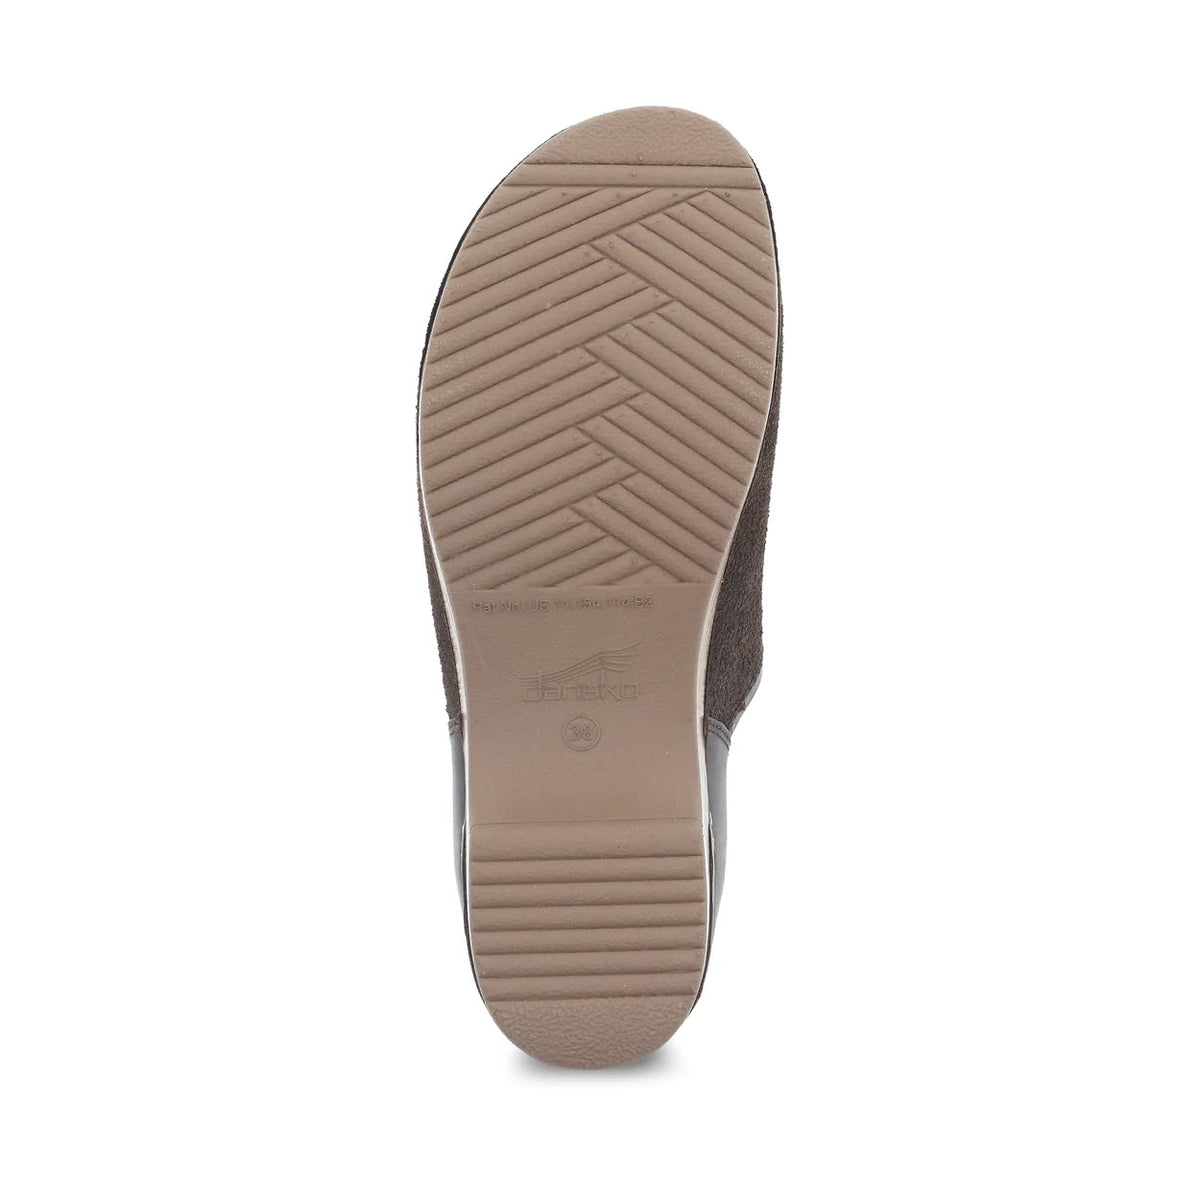 Bottom view of a brown DANSKO BRENNA CHOCOLATE BURNISHED - WOMEN shoe displaying its durable EVA outsole with engraved Dansko brand name.